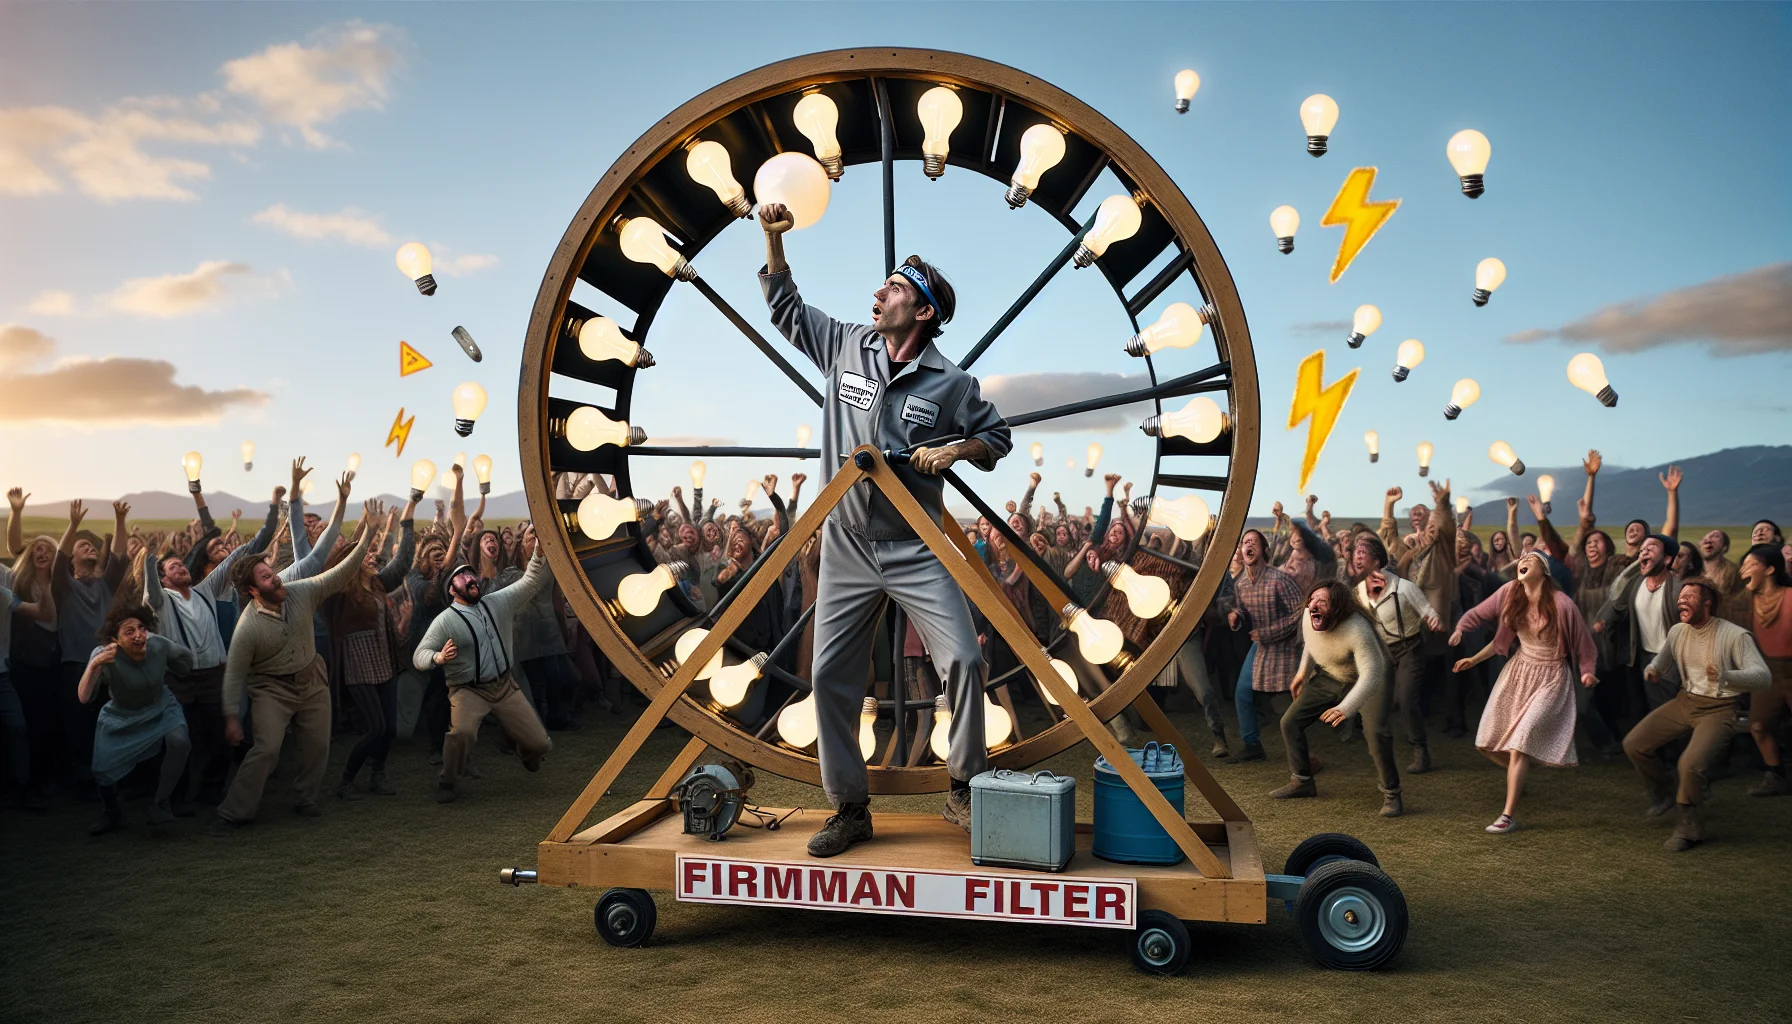 Create a playful and engaging scene featuring a man of unknown descent dressed as a service technician labelled 'Firman Filter'. He's performing a humorous act of cranking a giant hamster wheel with light bulbs attached, all lit up, symbolizing the generation of electricity. The setting is an open field during the daytime with a small audience of mixed gender and various descents laughing and cheering. Symbols of electricity, like sparkles and lightning bolts, add a touch of magic, highlighting the fun-filled and positive nature of generating power.